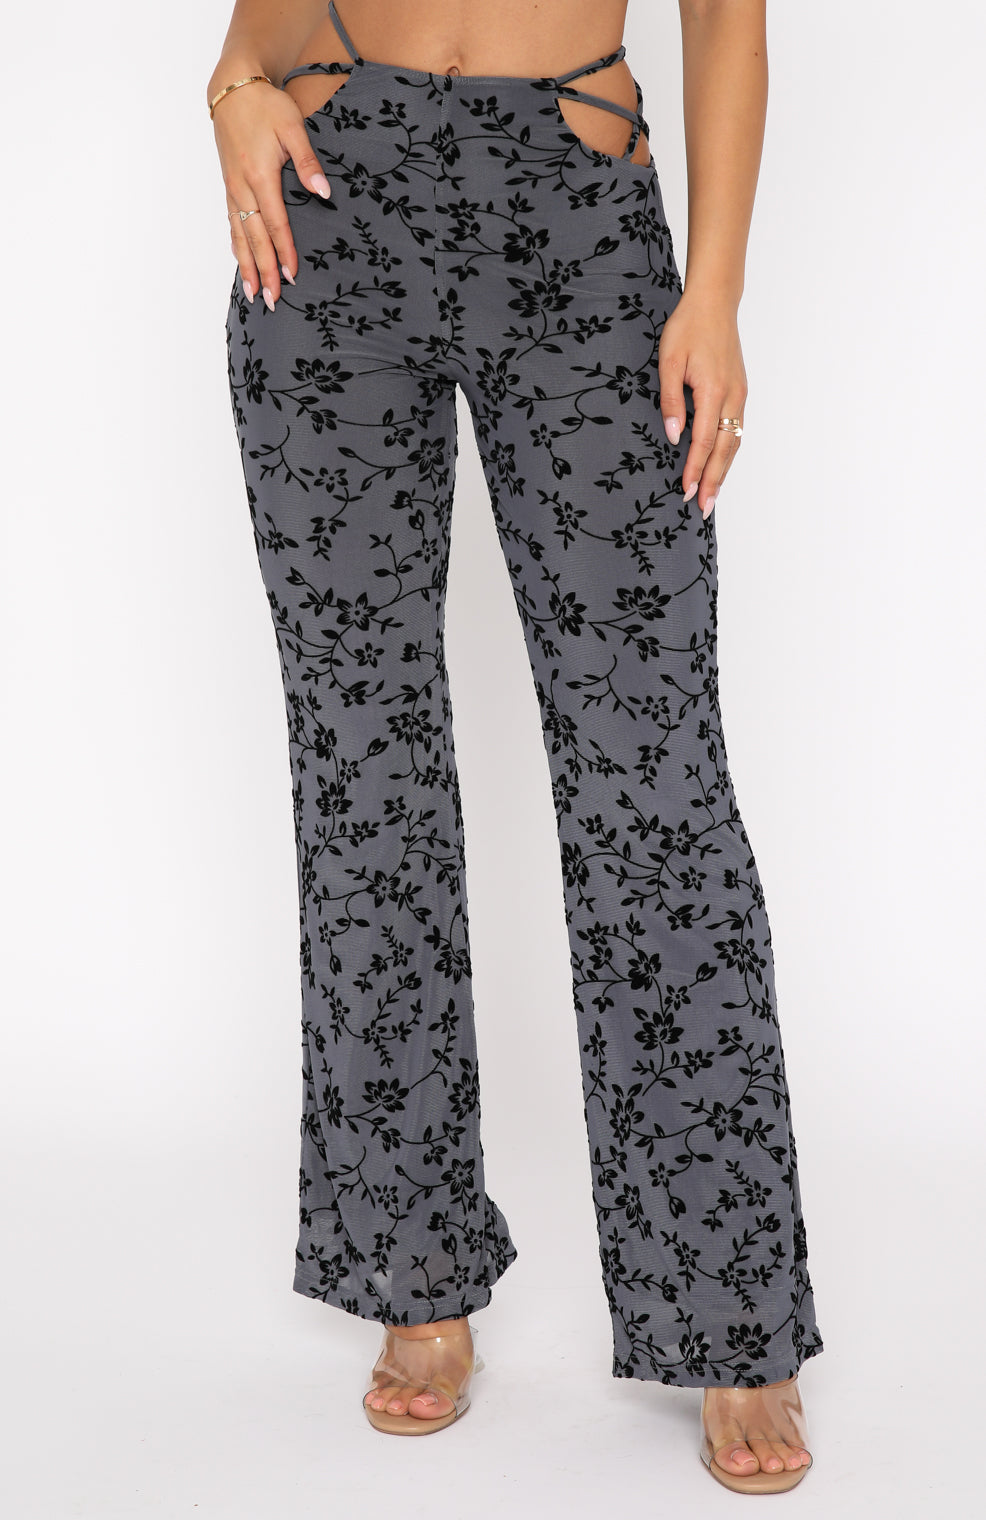 Smooth Operator Pants Charcoal | White Fox Boutique US